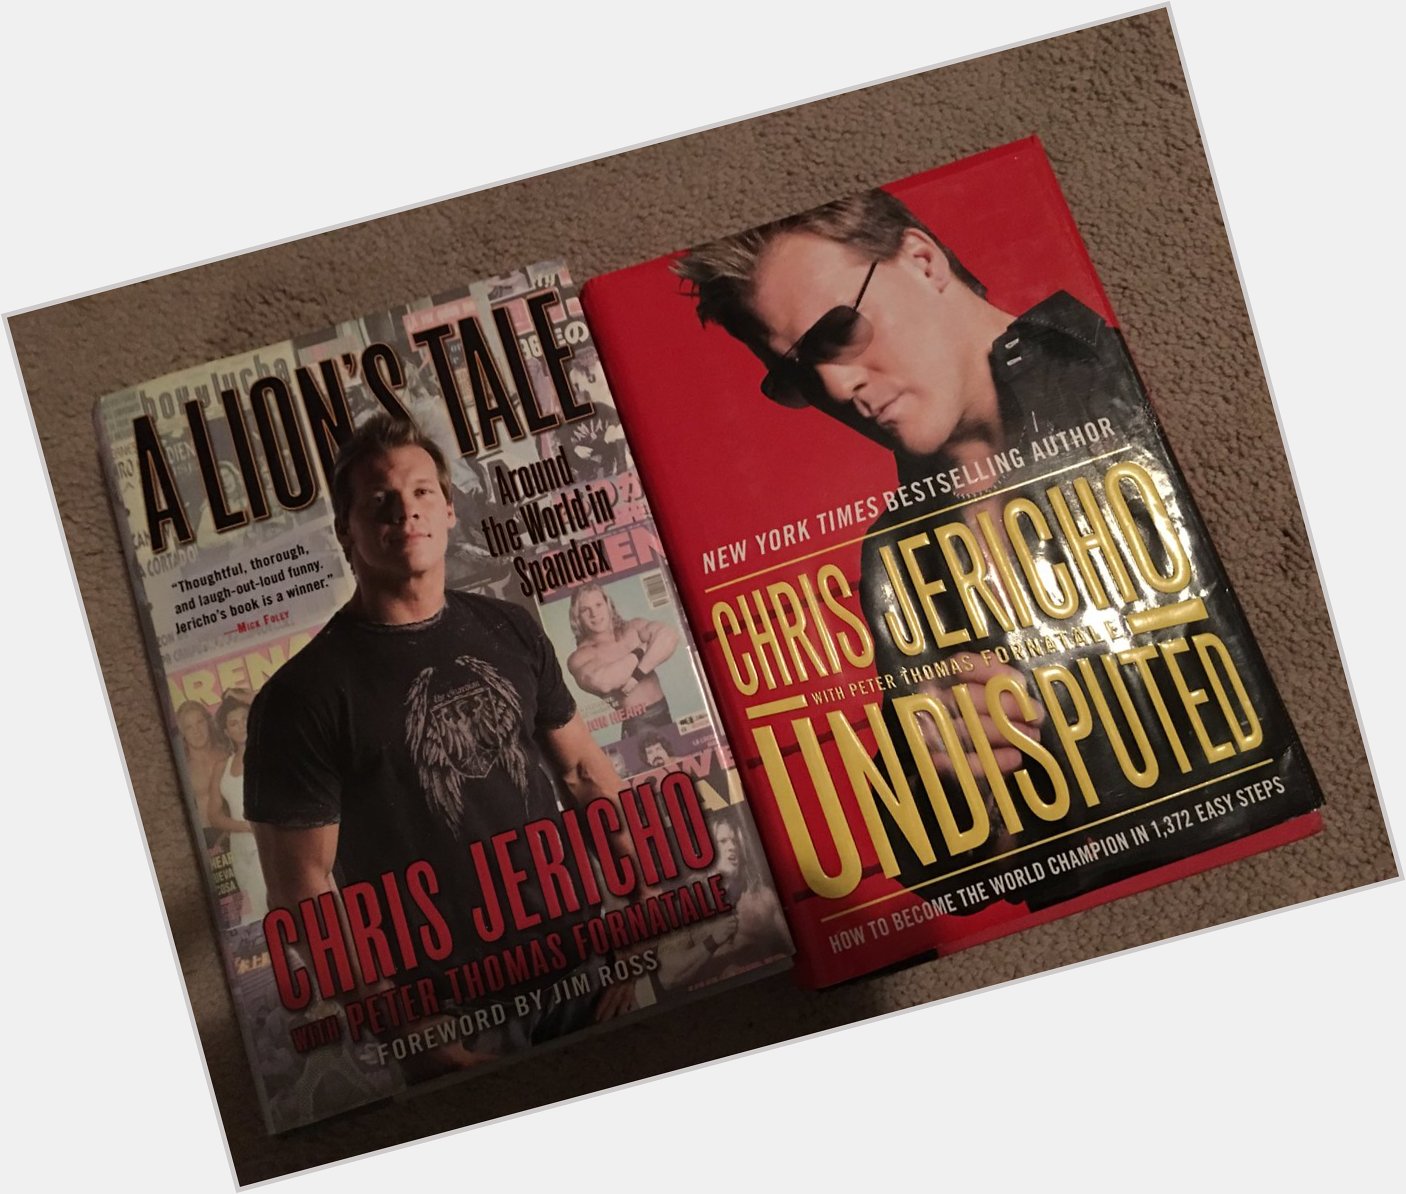  HAPPY BIRTHDAY CHRIS JERICHO~! Thanks for all the great wrestling and great books! 